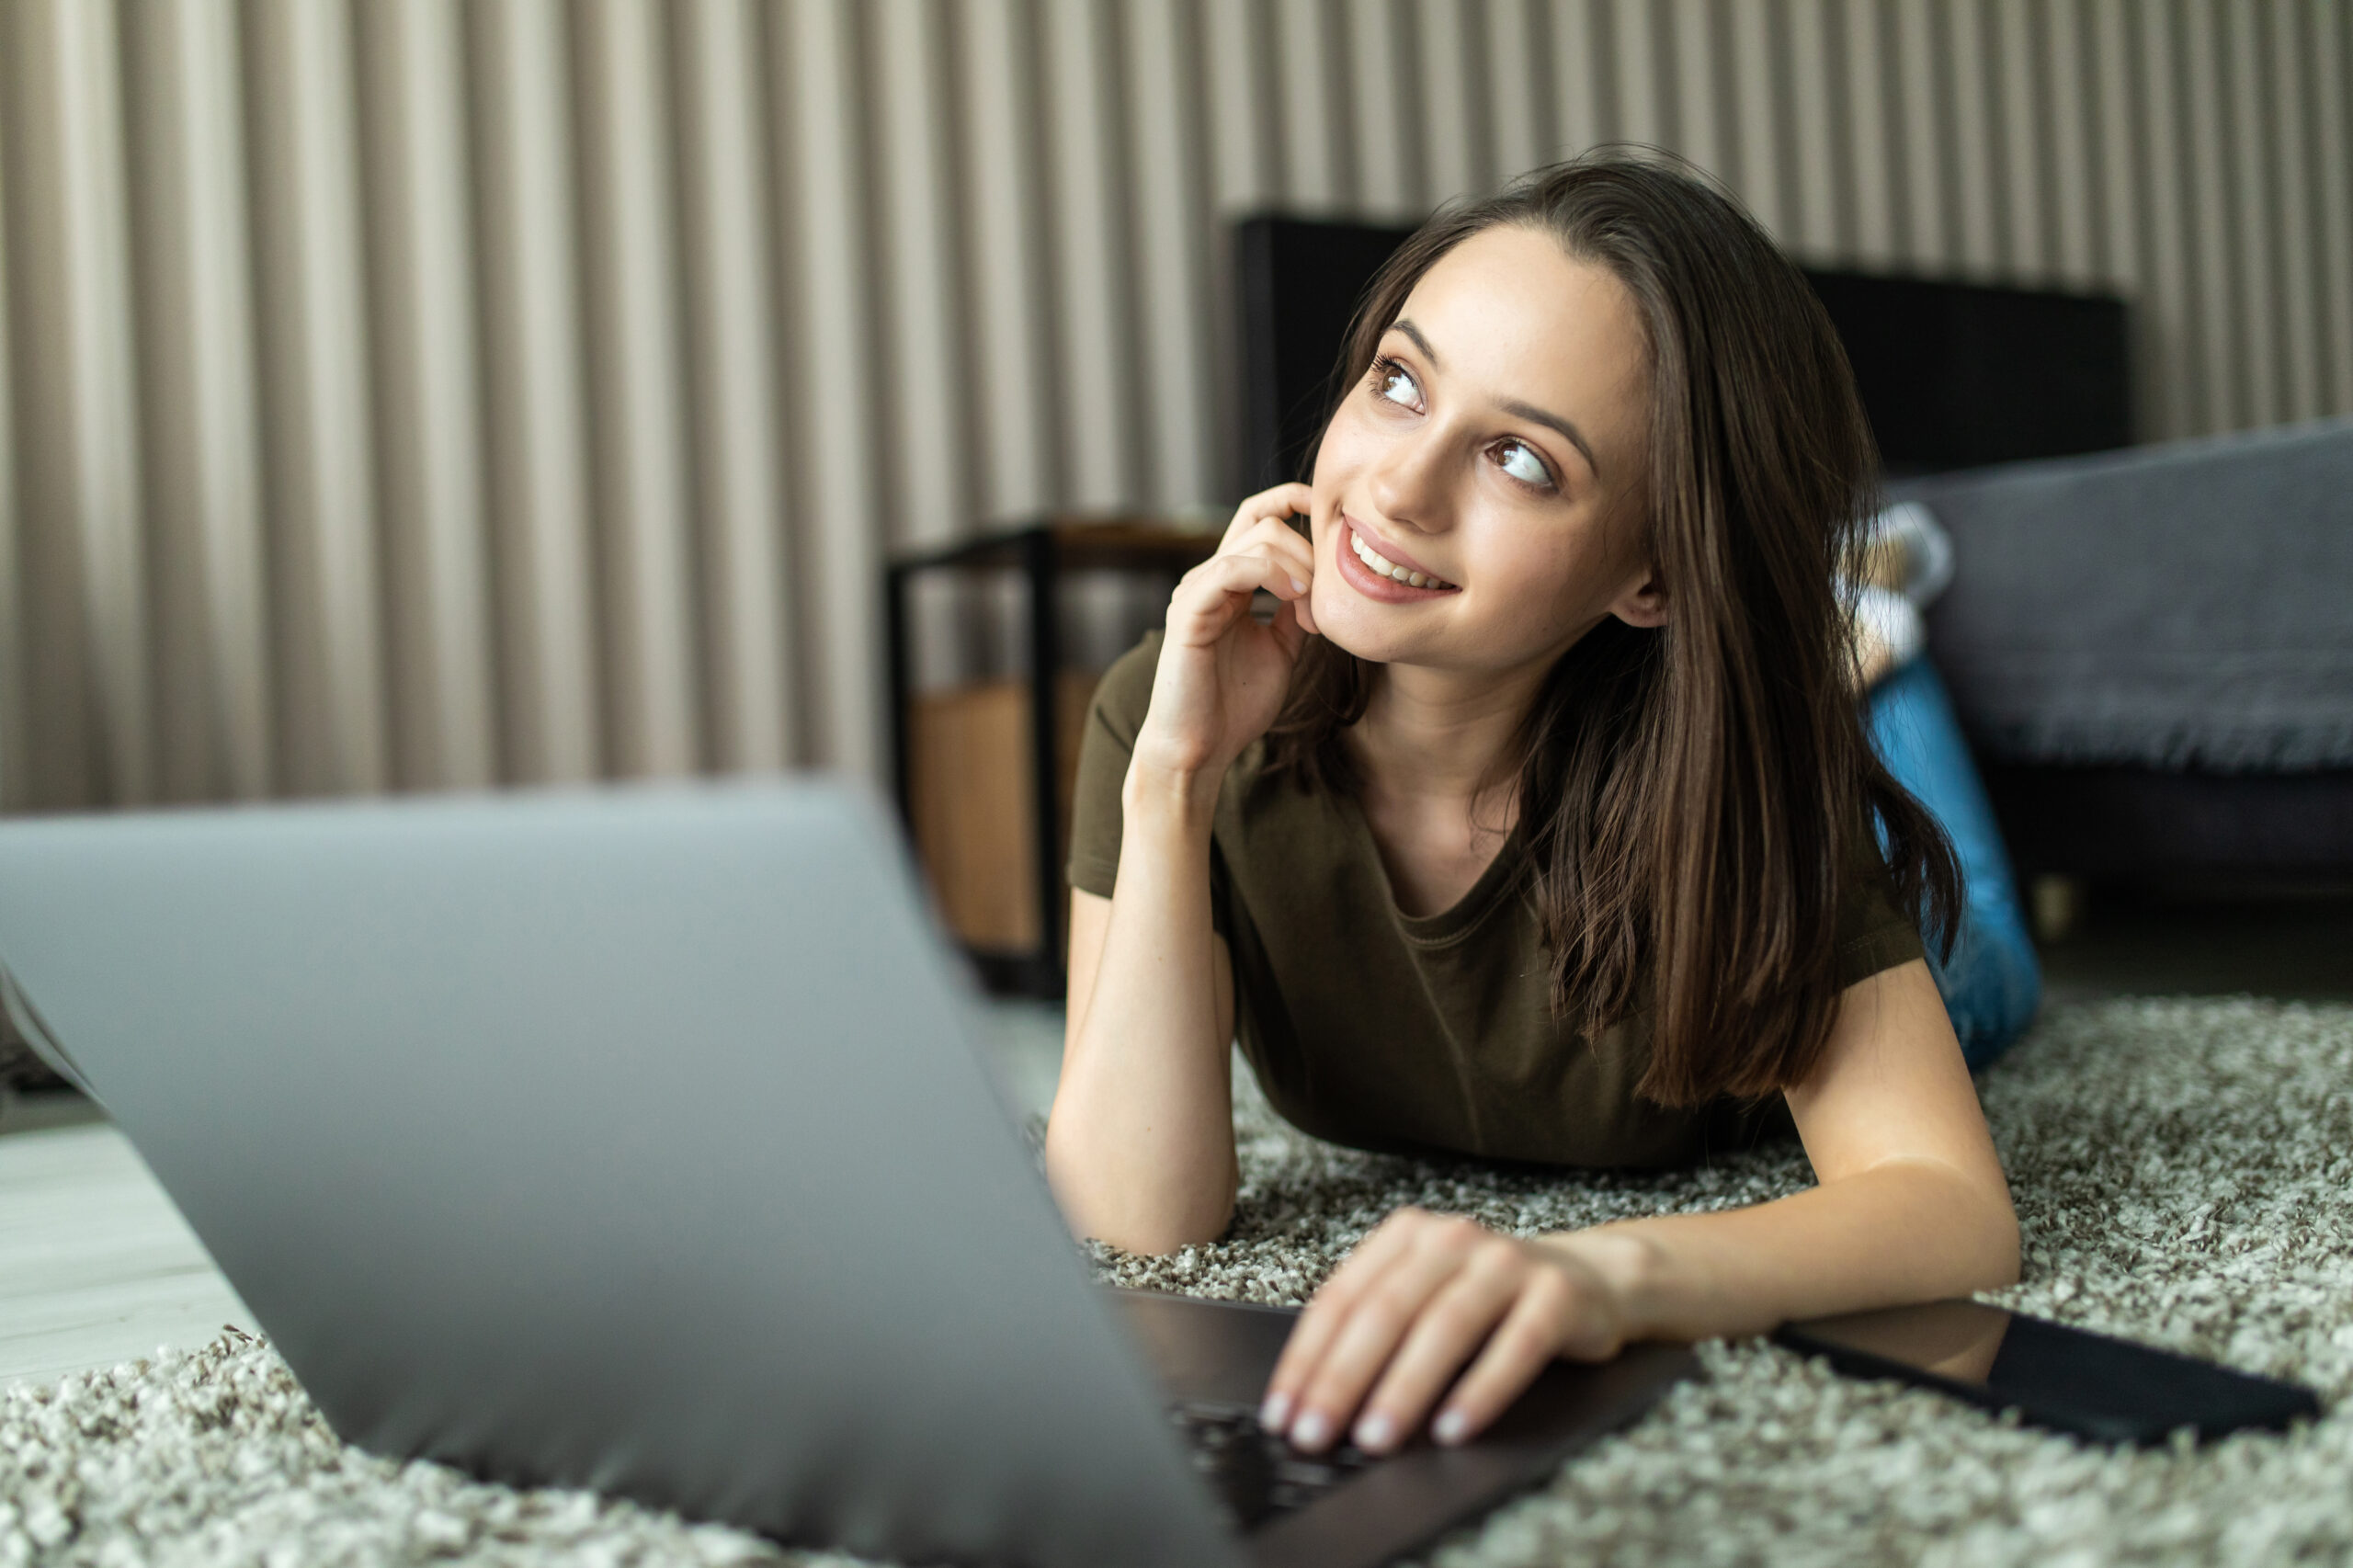 pensive young woman using laptop sitting on the floor with hand on chin